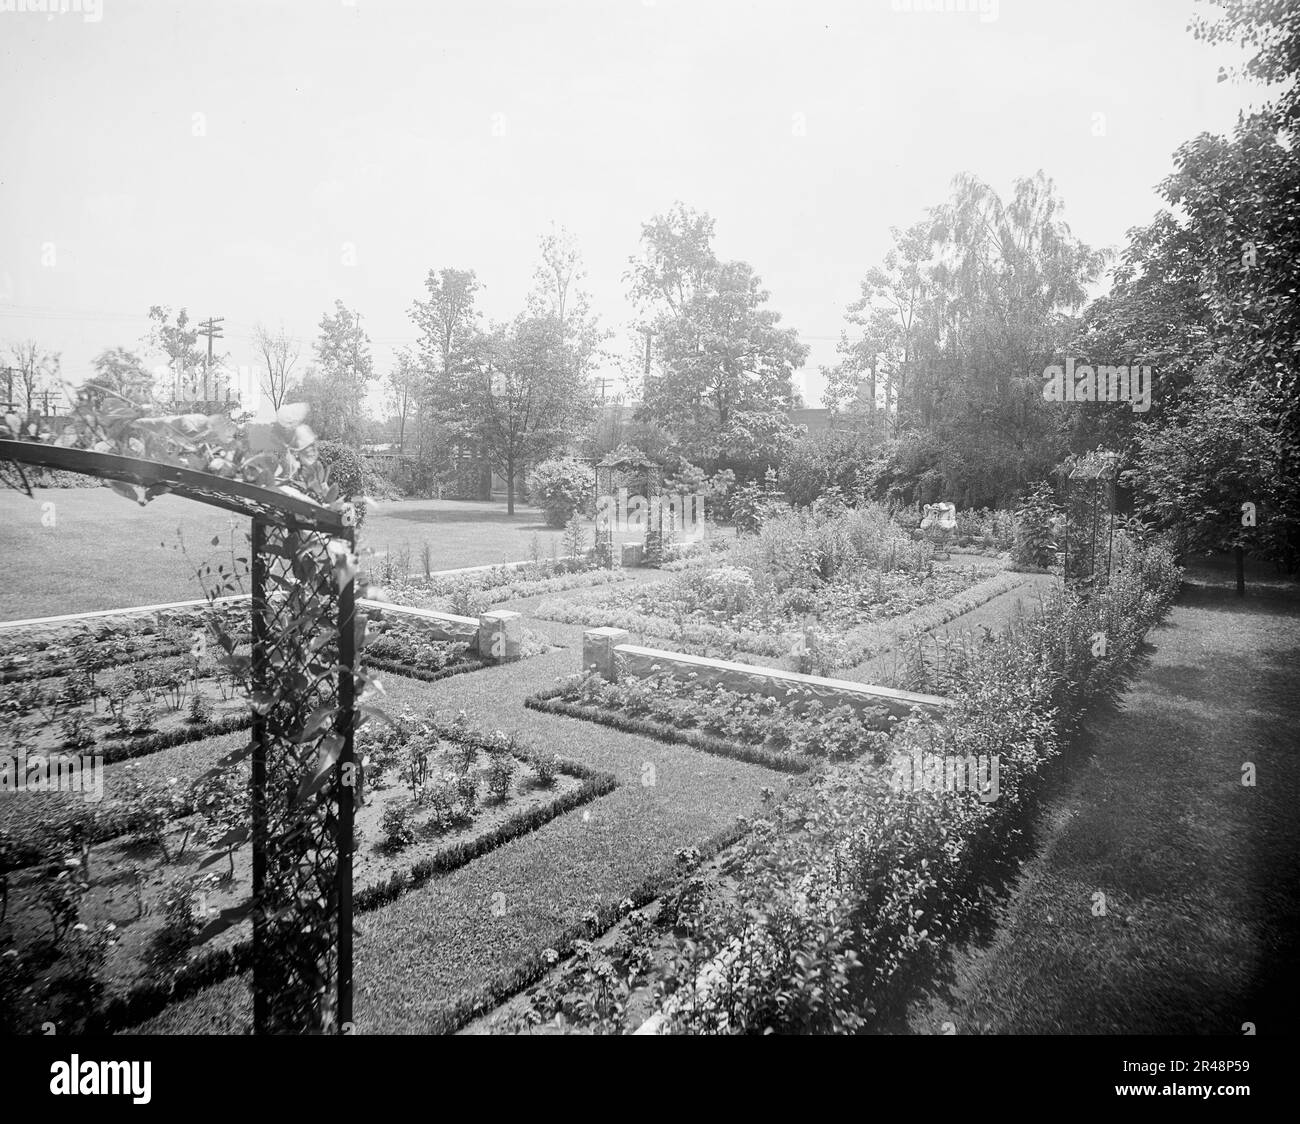 Residence of Mrs. Franklin H. Walker, garden, Detroit, Mich., between 1905 and 1915. Stock Photo